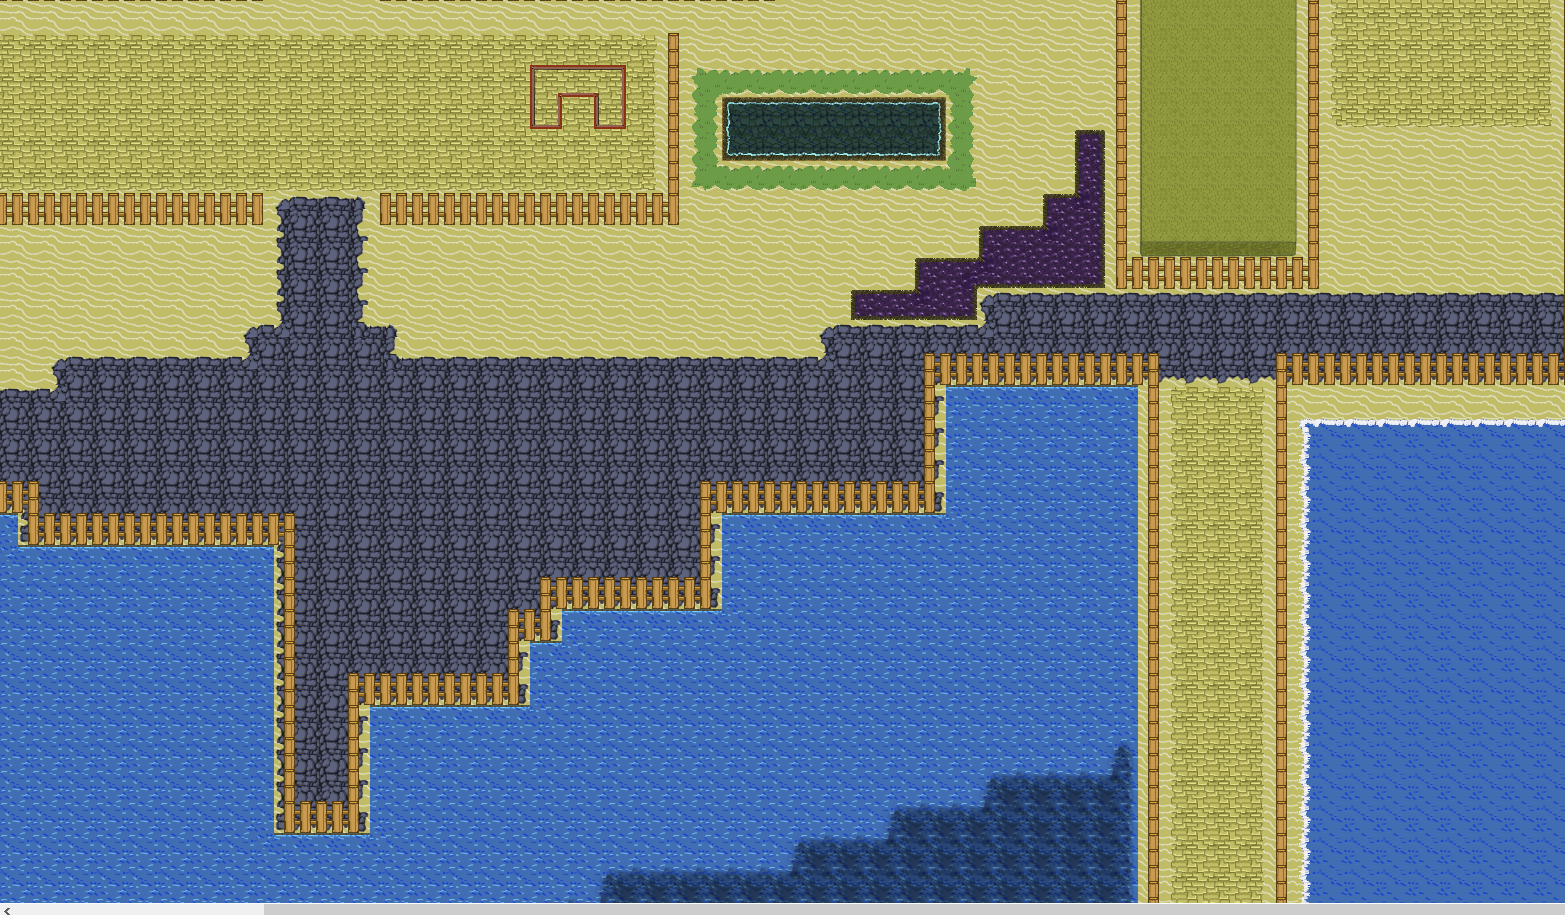 Examples of the new Tileset